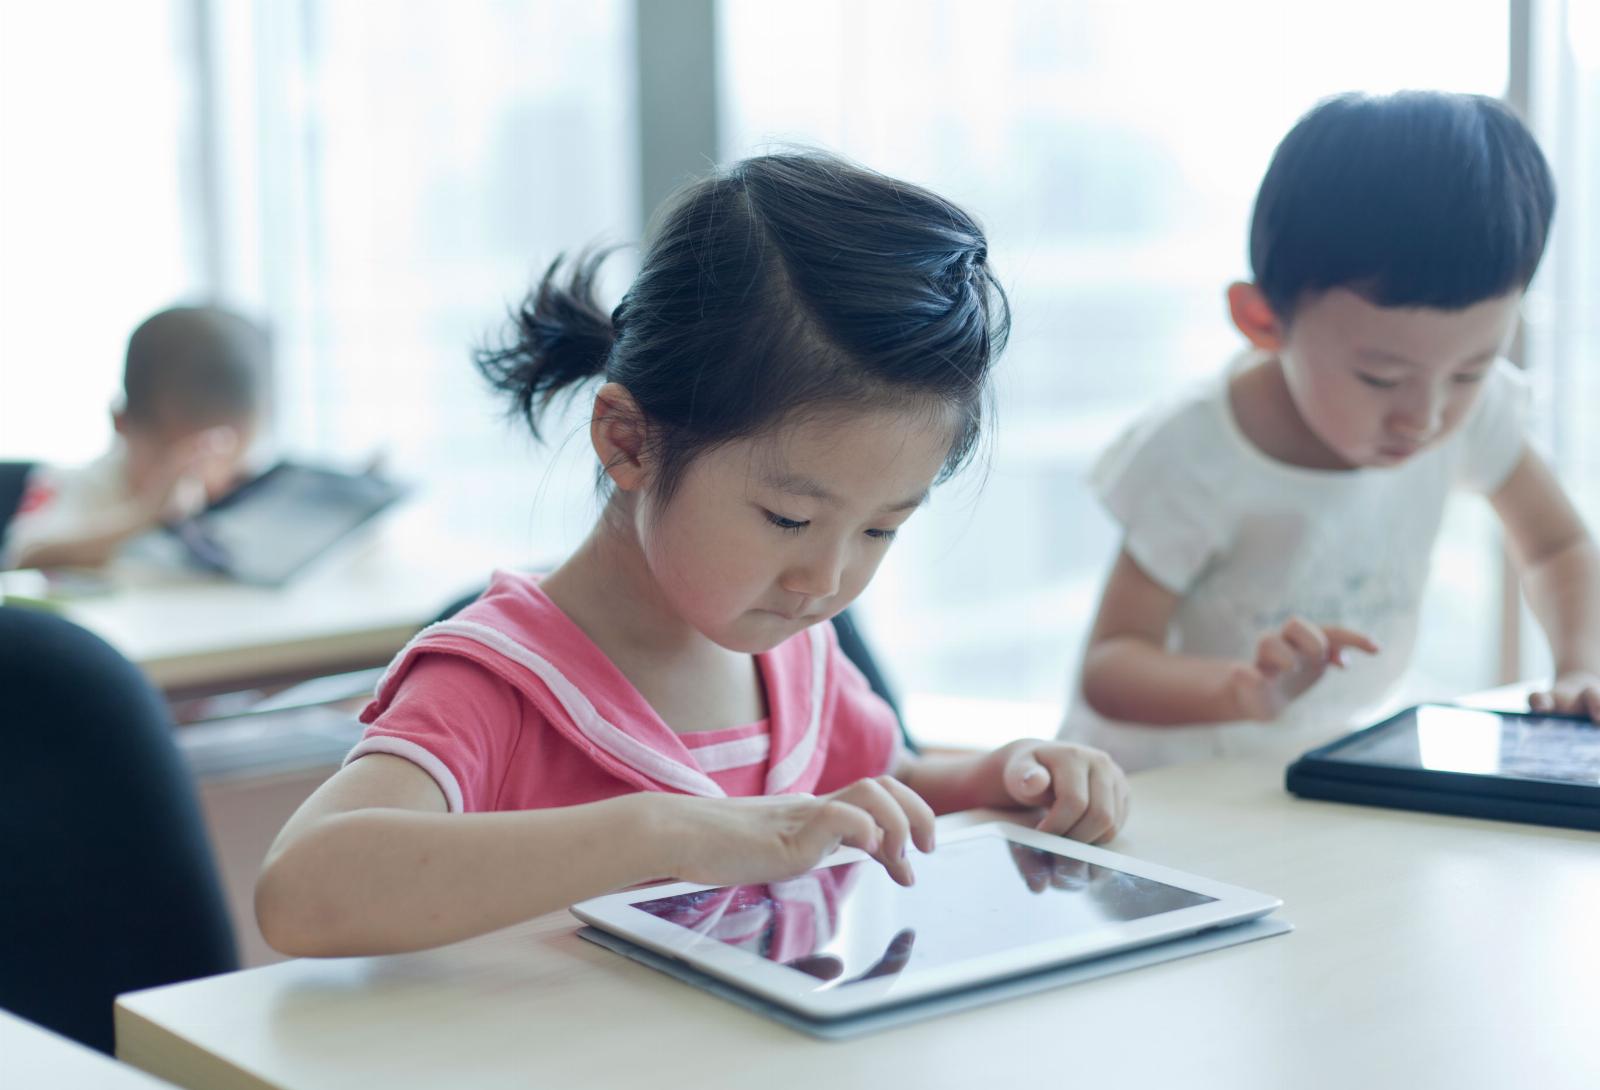 Forta raises $55M to train parents to look after their autistic kids